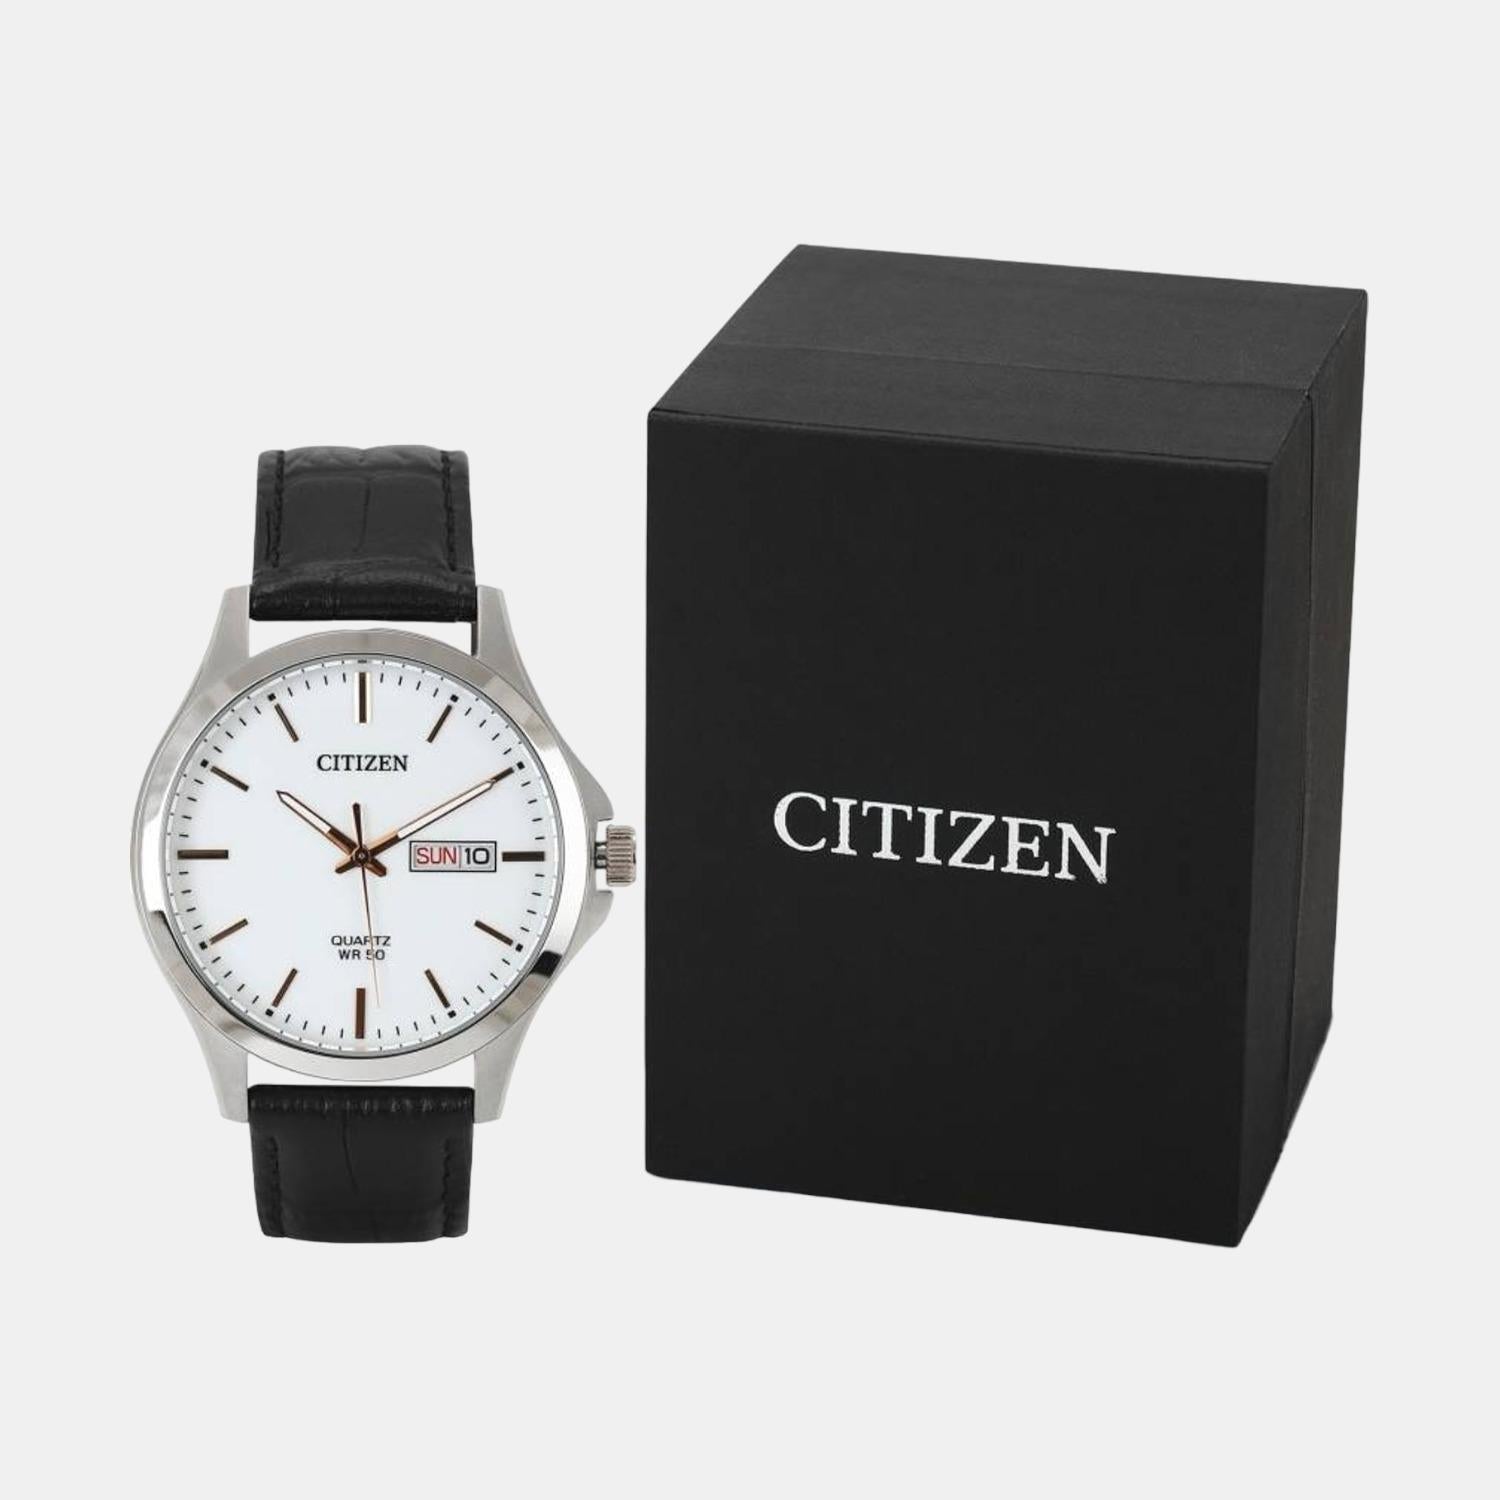 citizen-stainless-steel-white-analog-male-watch-bf2009-11a